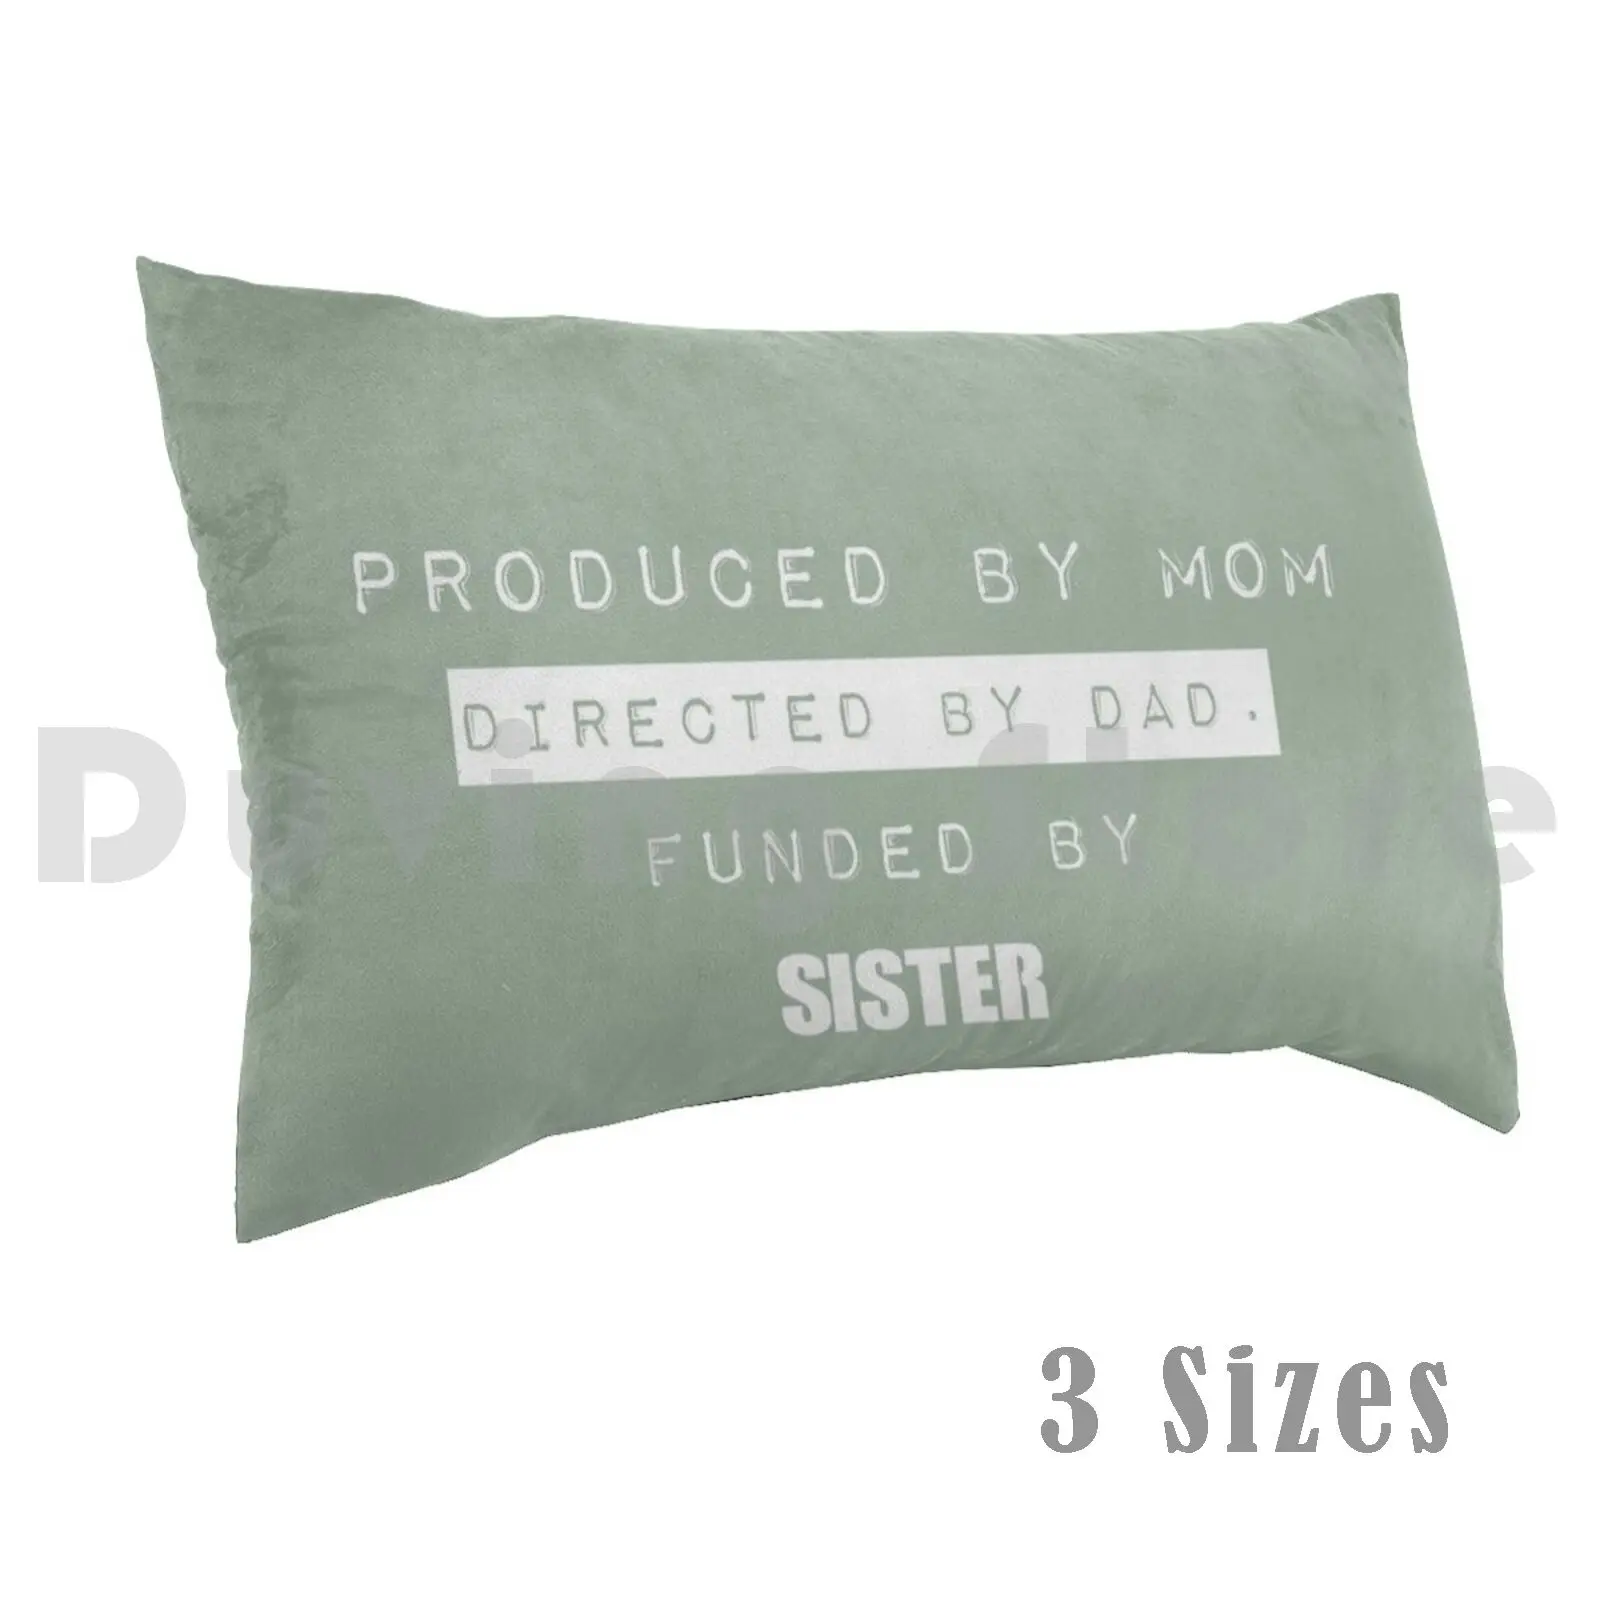 

Produced By Mom Directed By Dad Funded By Sister Pillow Case DIY 50x75 Produced By Mom Directed By Dad Funded